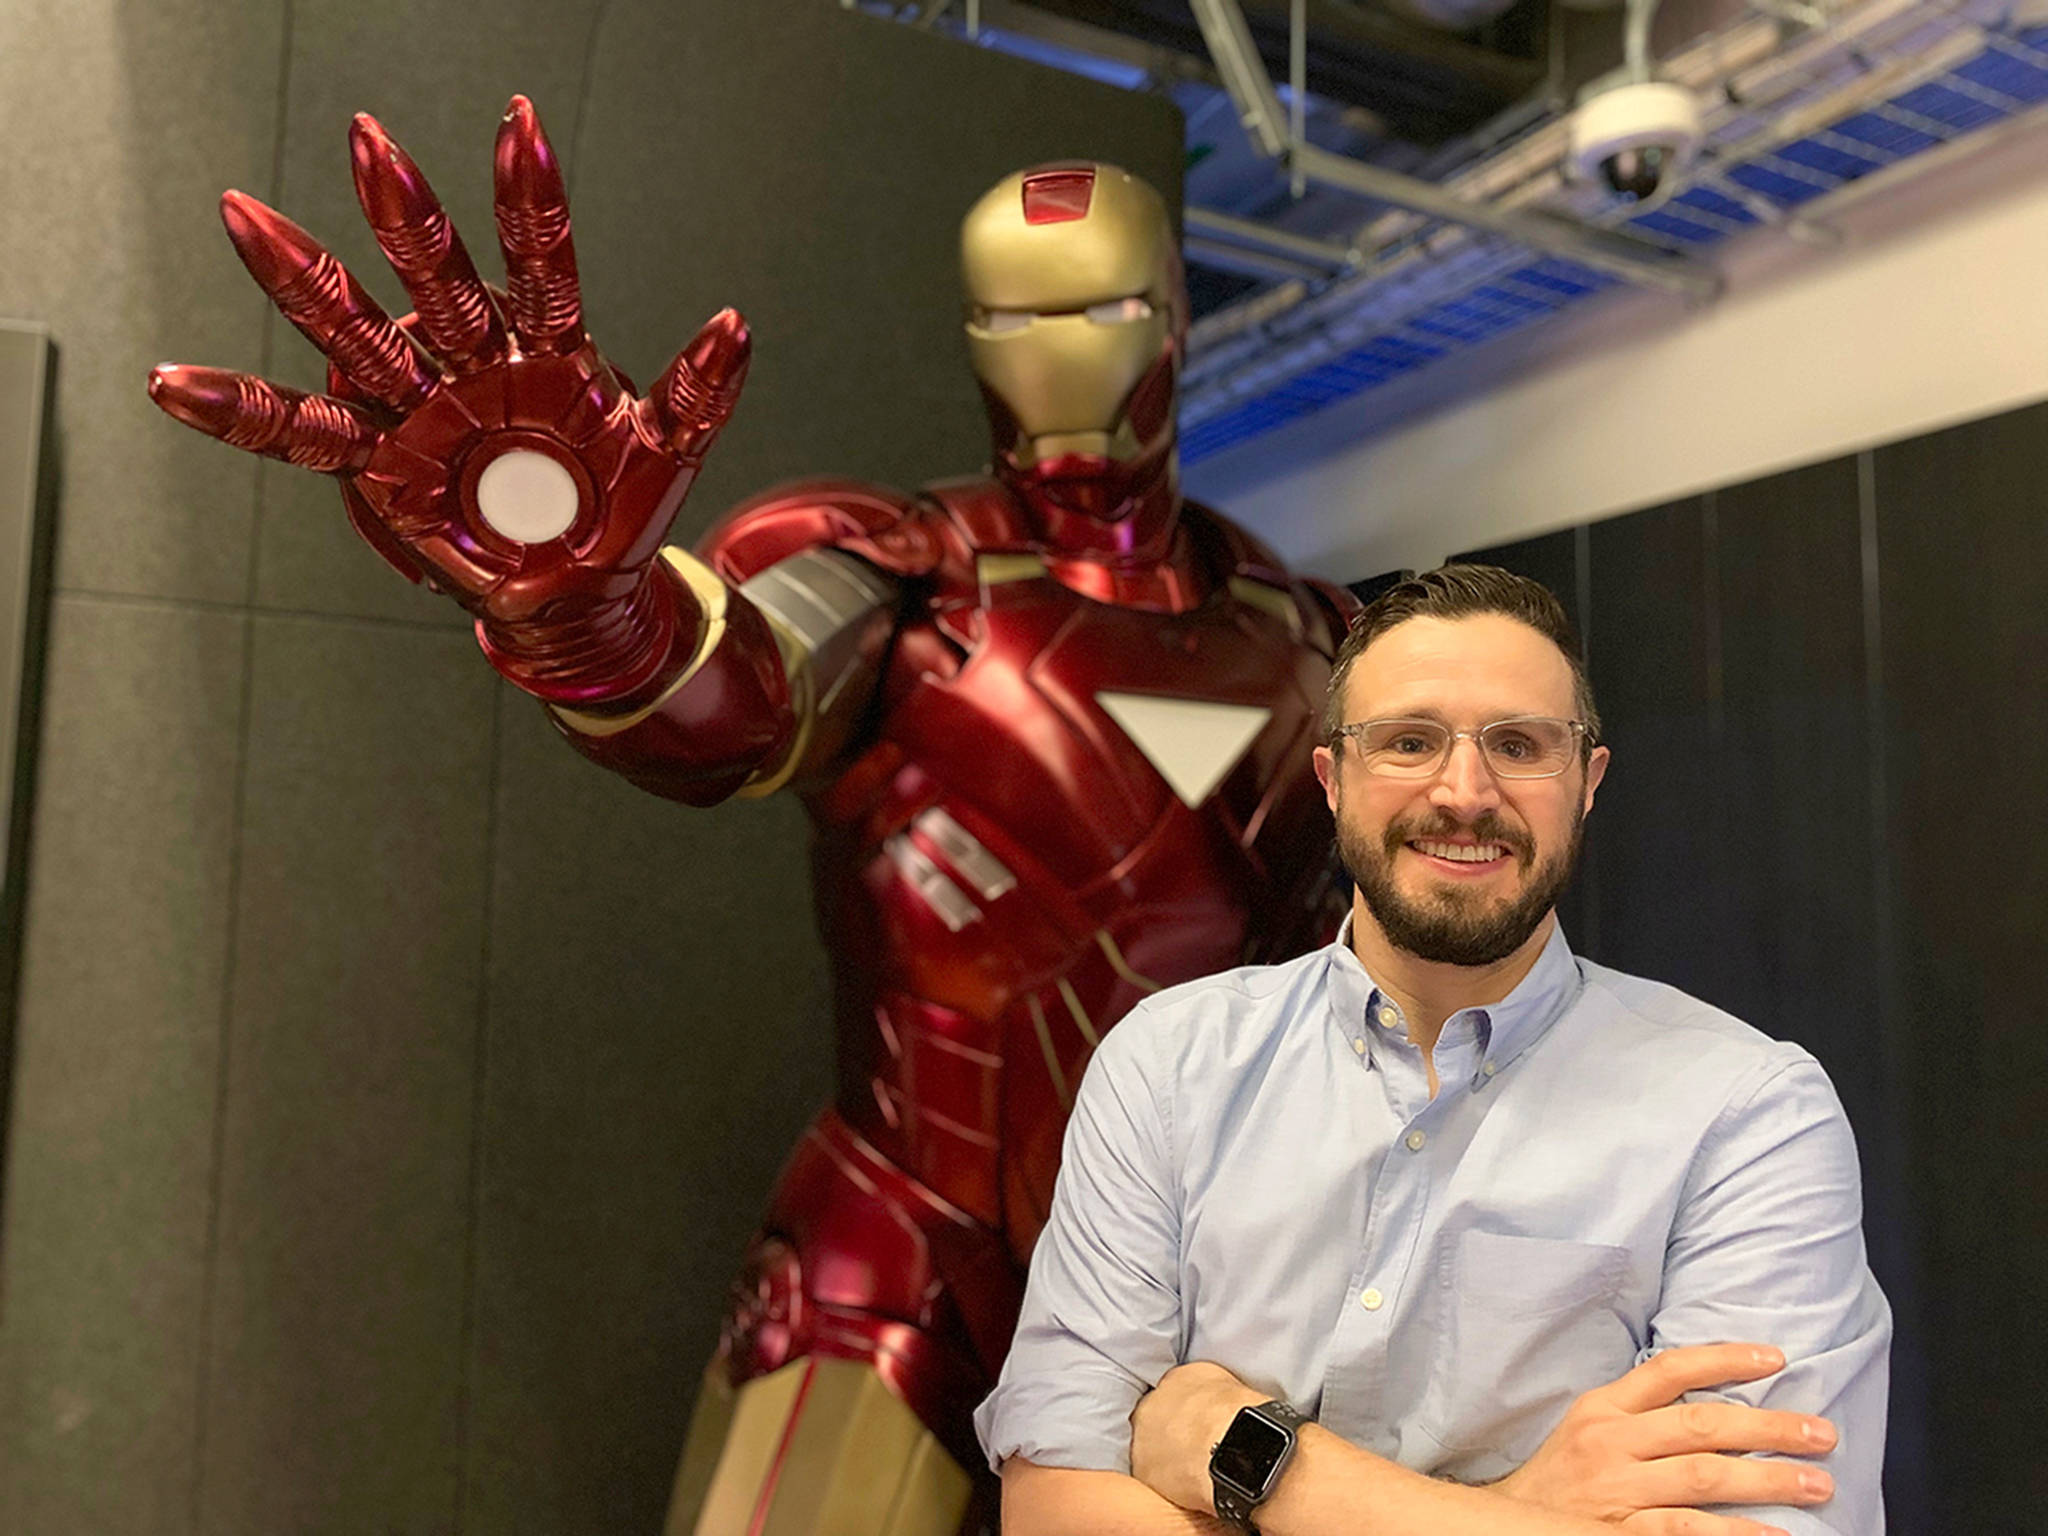 (Courtesy Adam Cole) Posed next to an Iron Man statue at Marvel Studios in Los Angeles, Adam Cole has been a post-production supervisor and coordinator for many of the studios blockbuster movies.